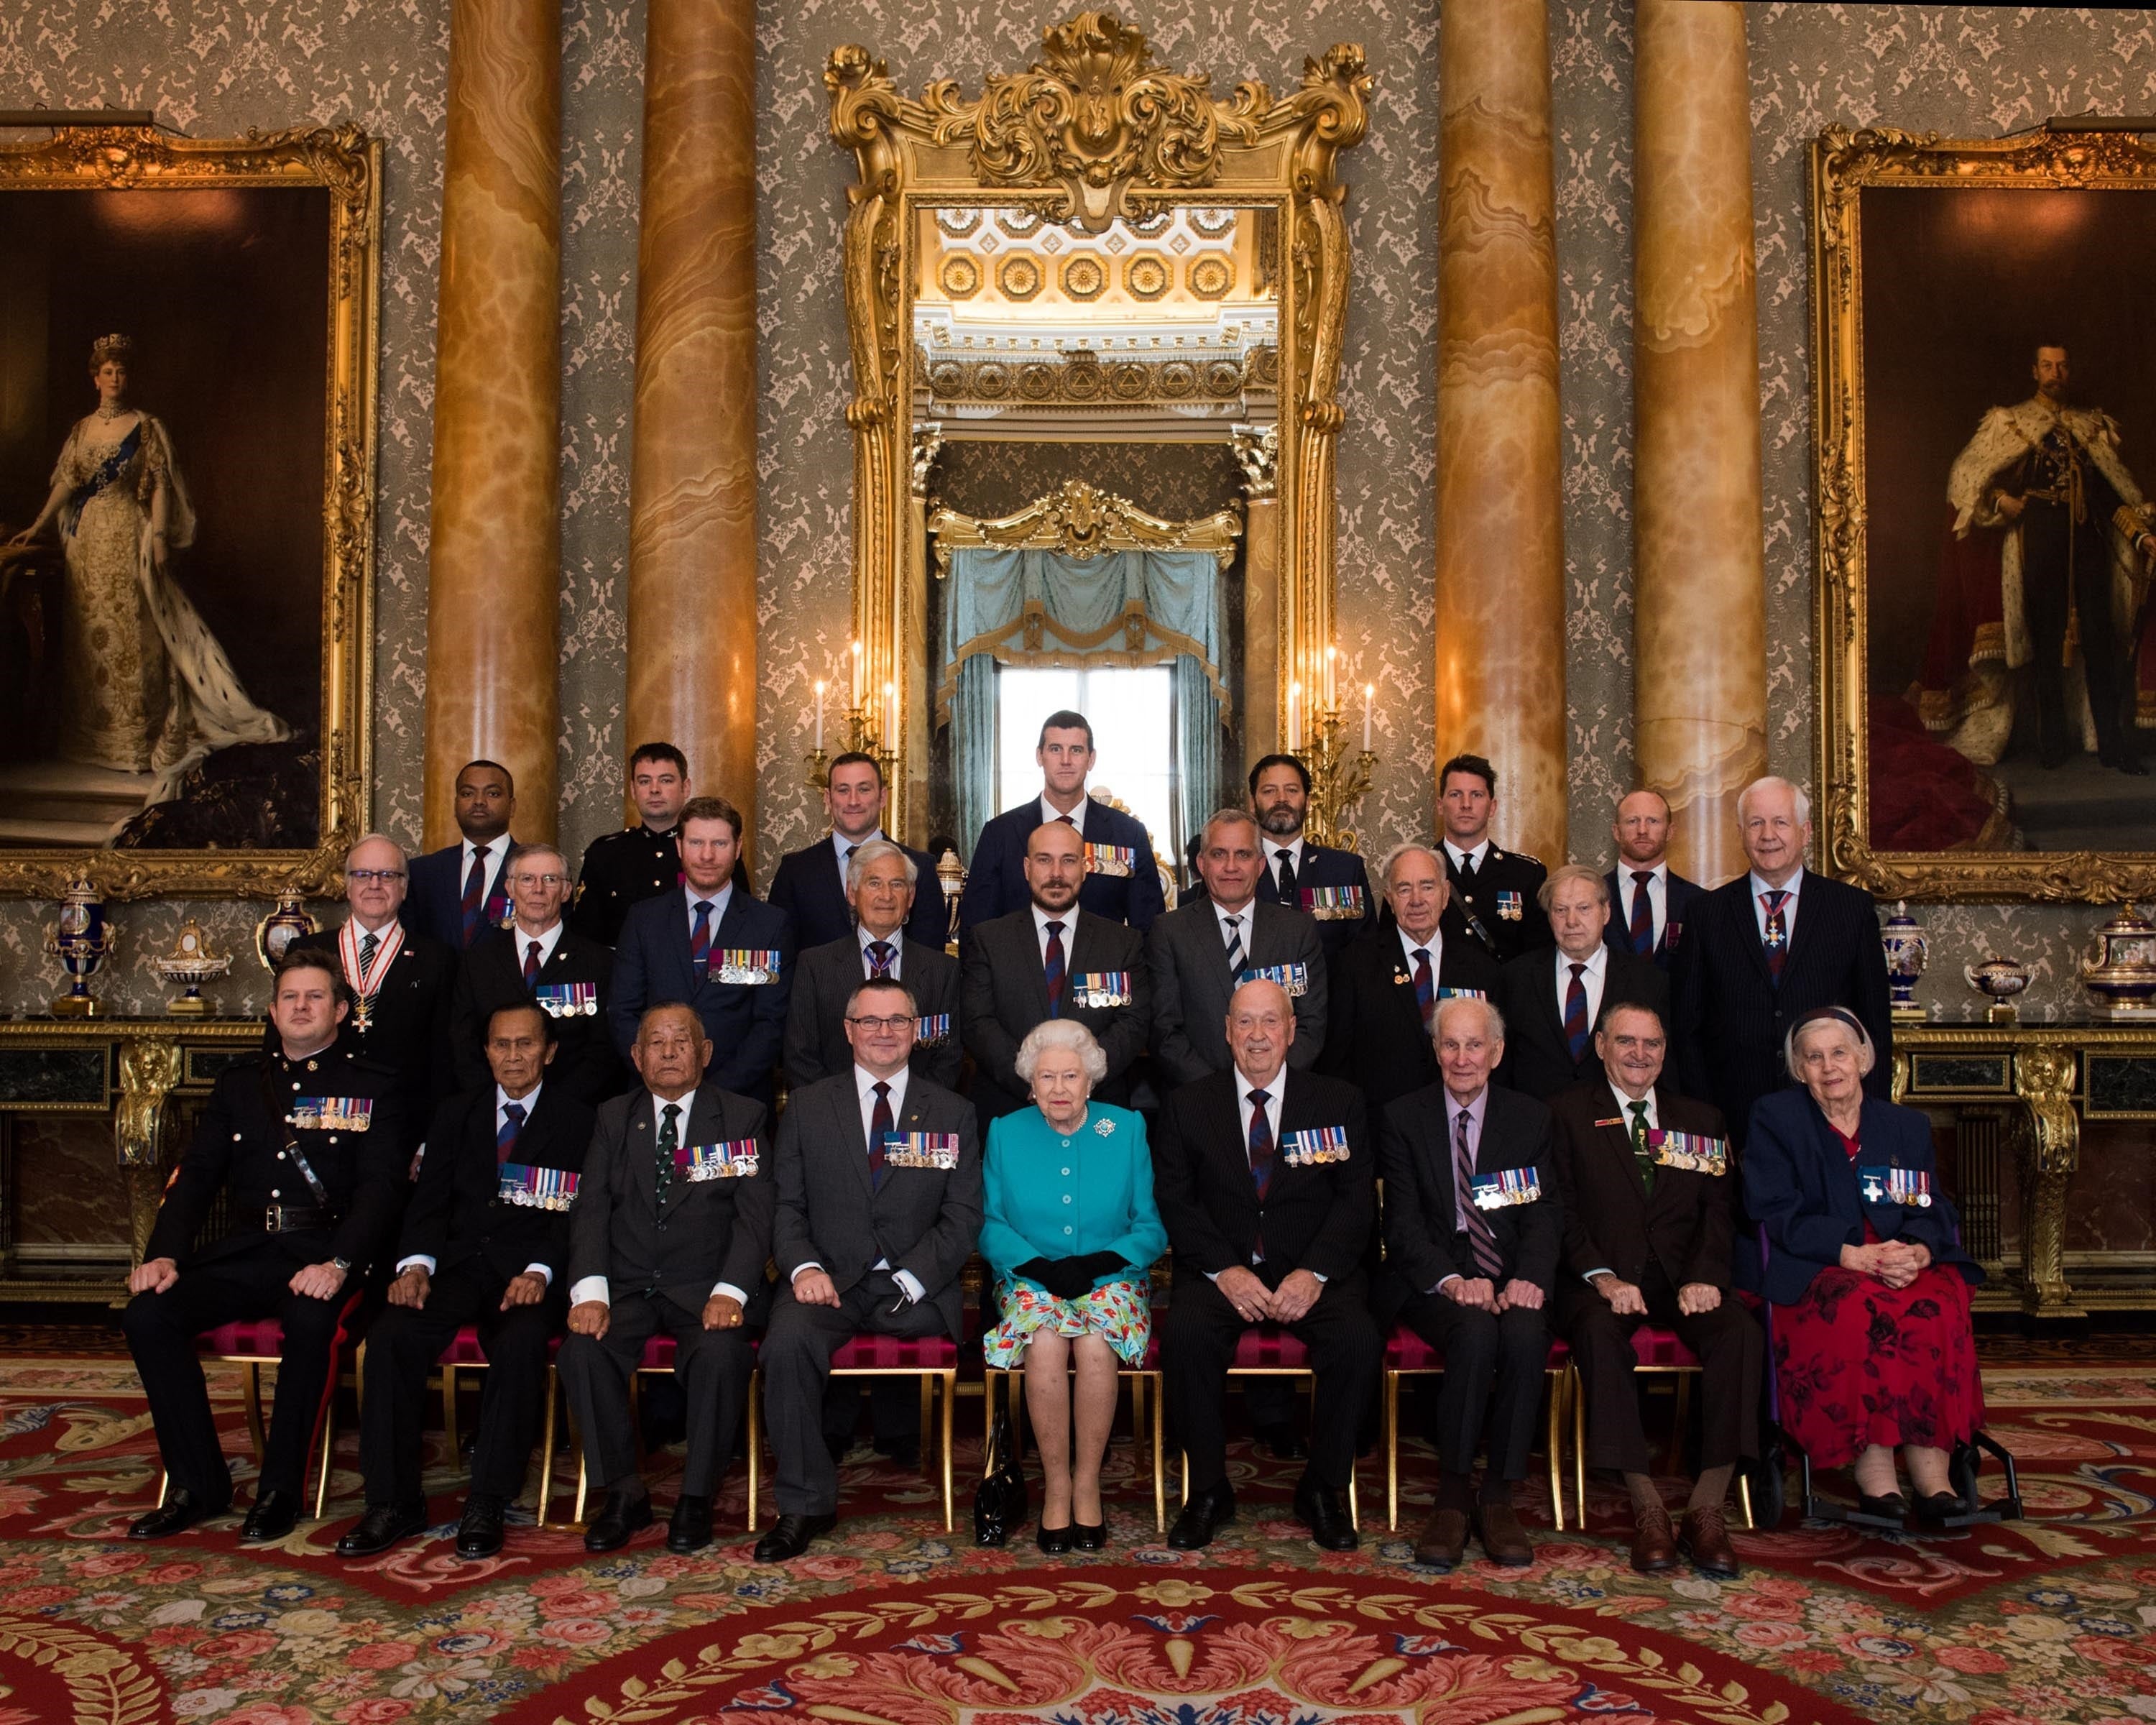 Members of the VC and GC Association at a meeting with the Queen (Sgt Paul Randall RLC/MoD/PA)